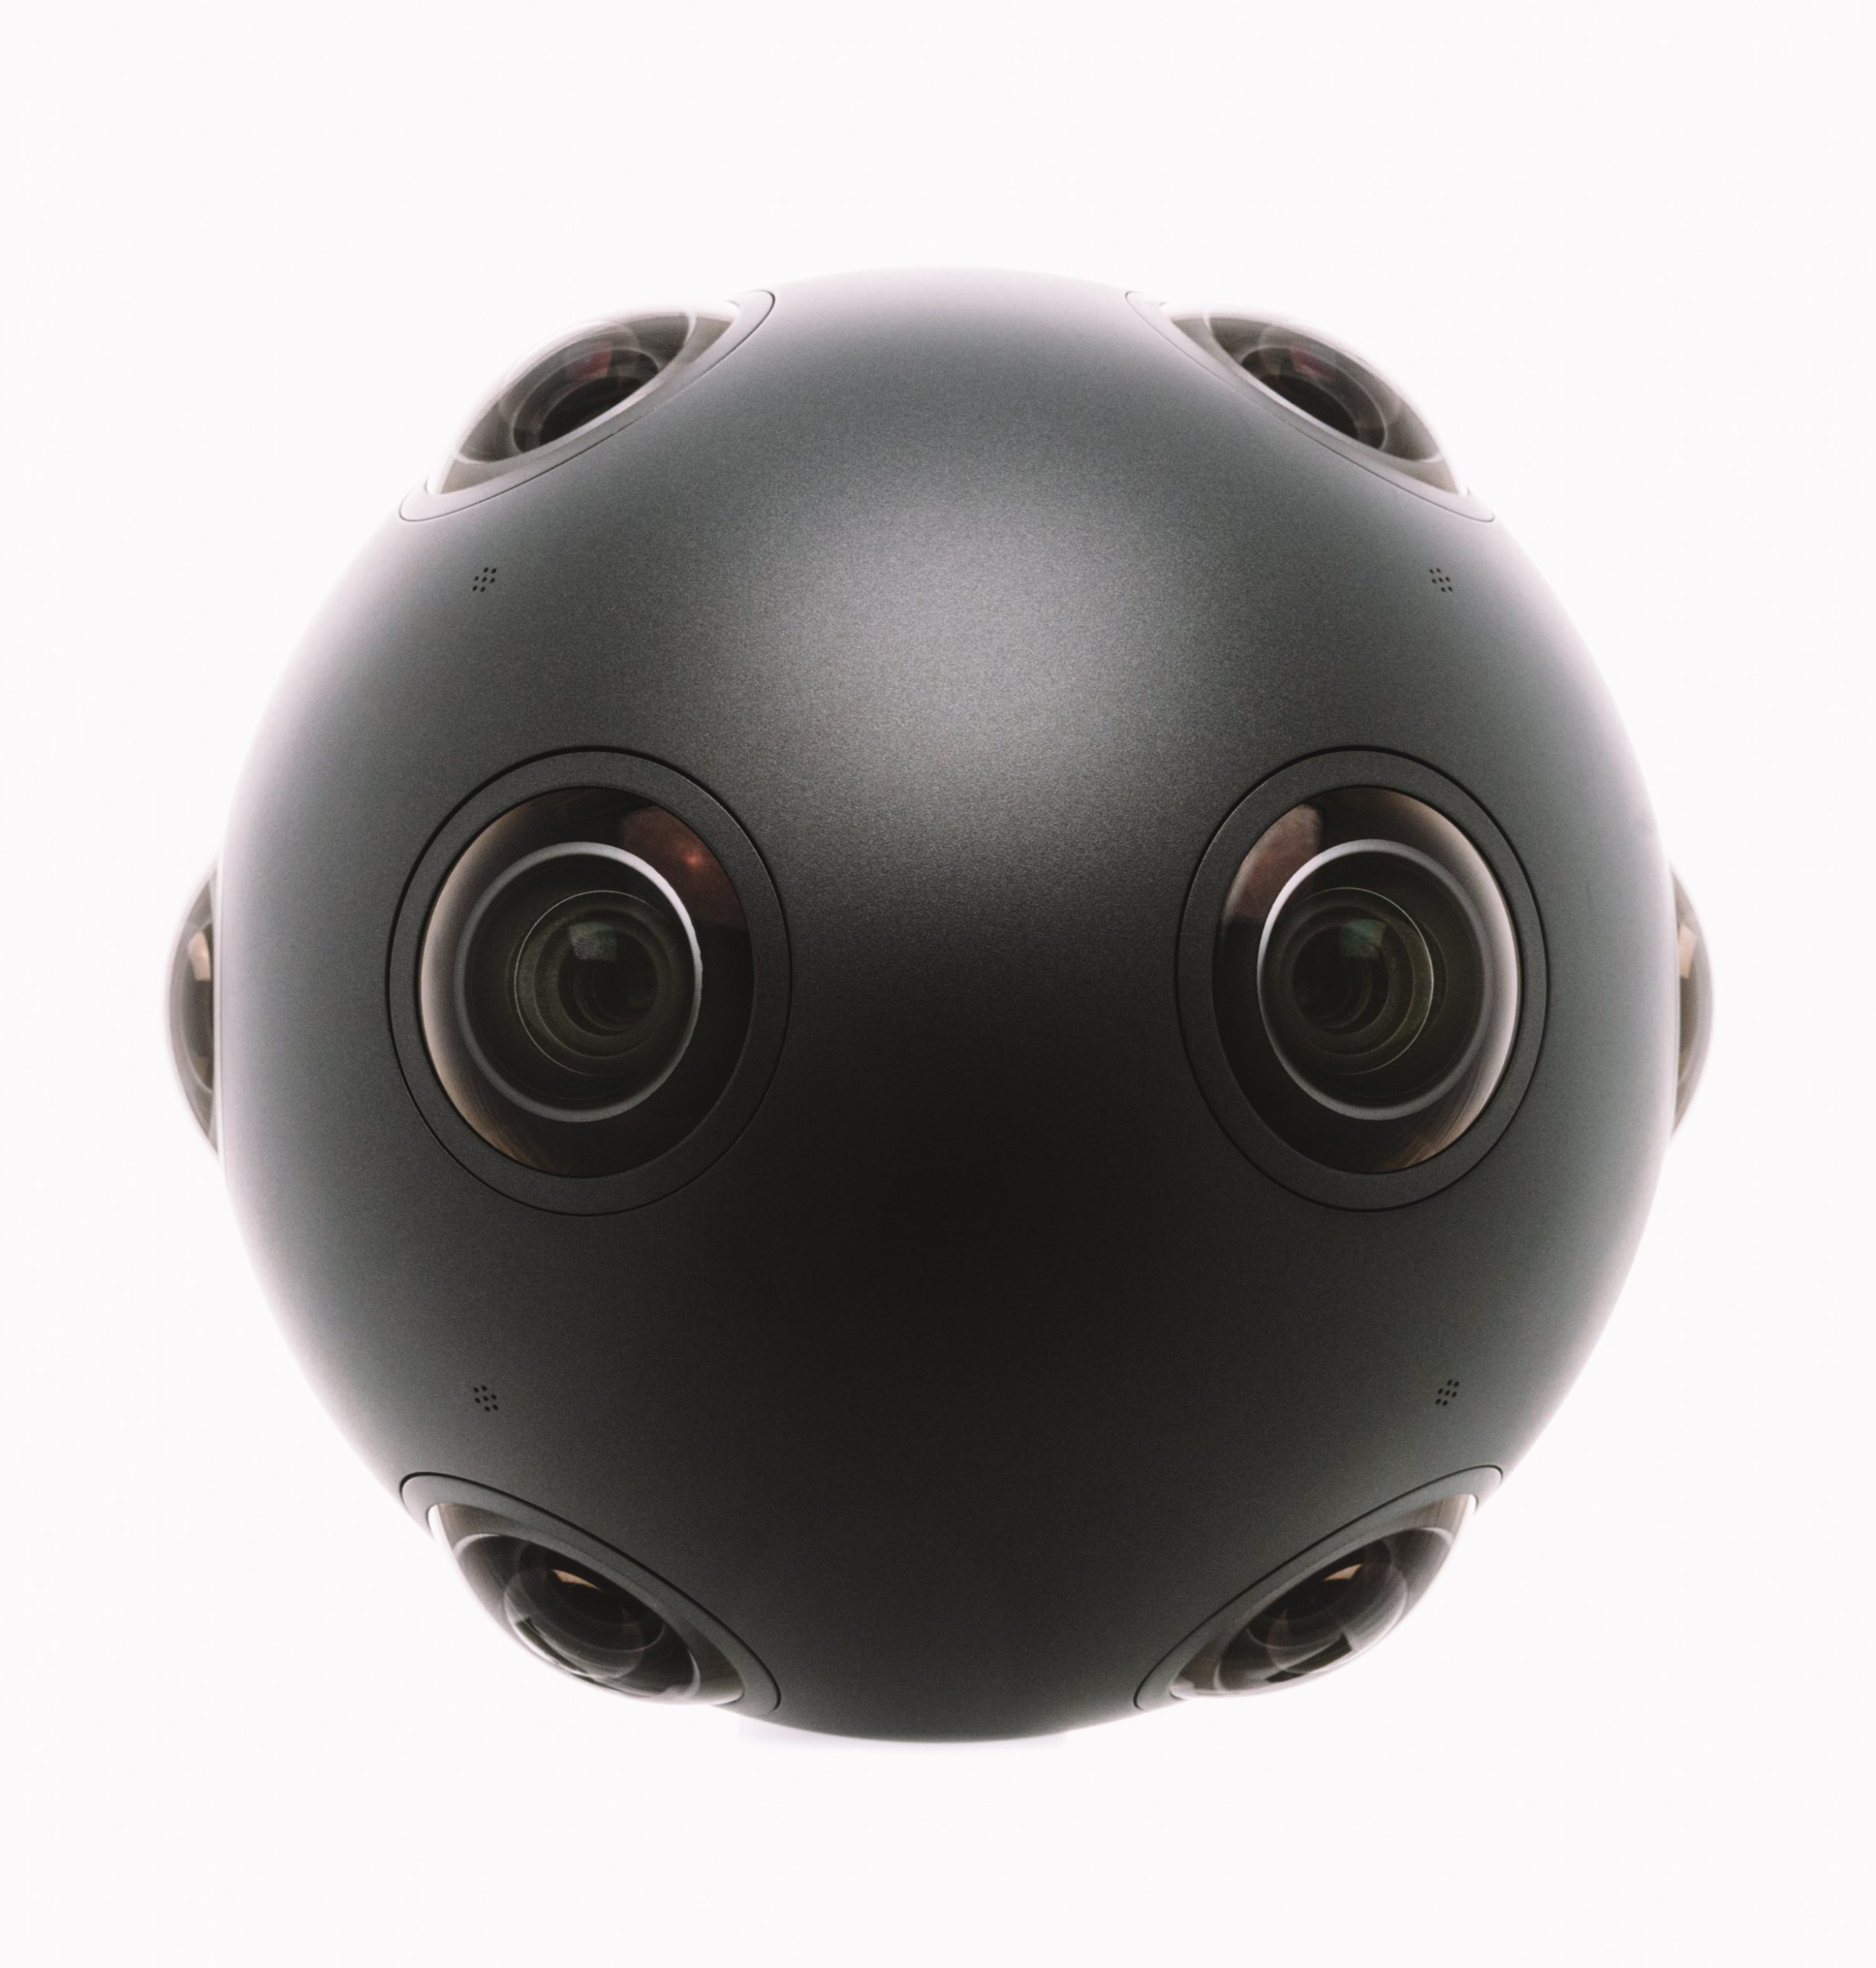 Nokia OZO 3D Virtual Reality Video Camera Sees and Hears All